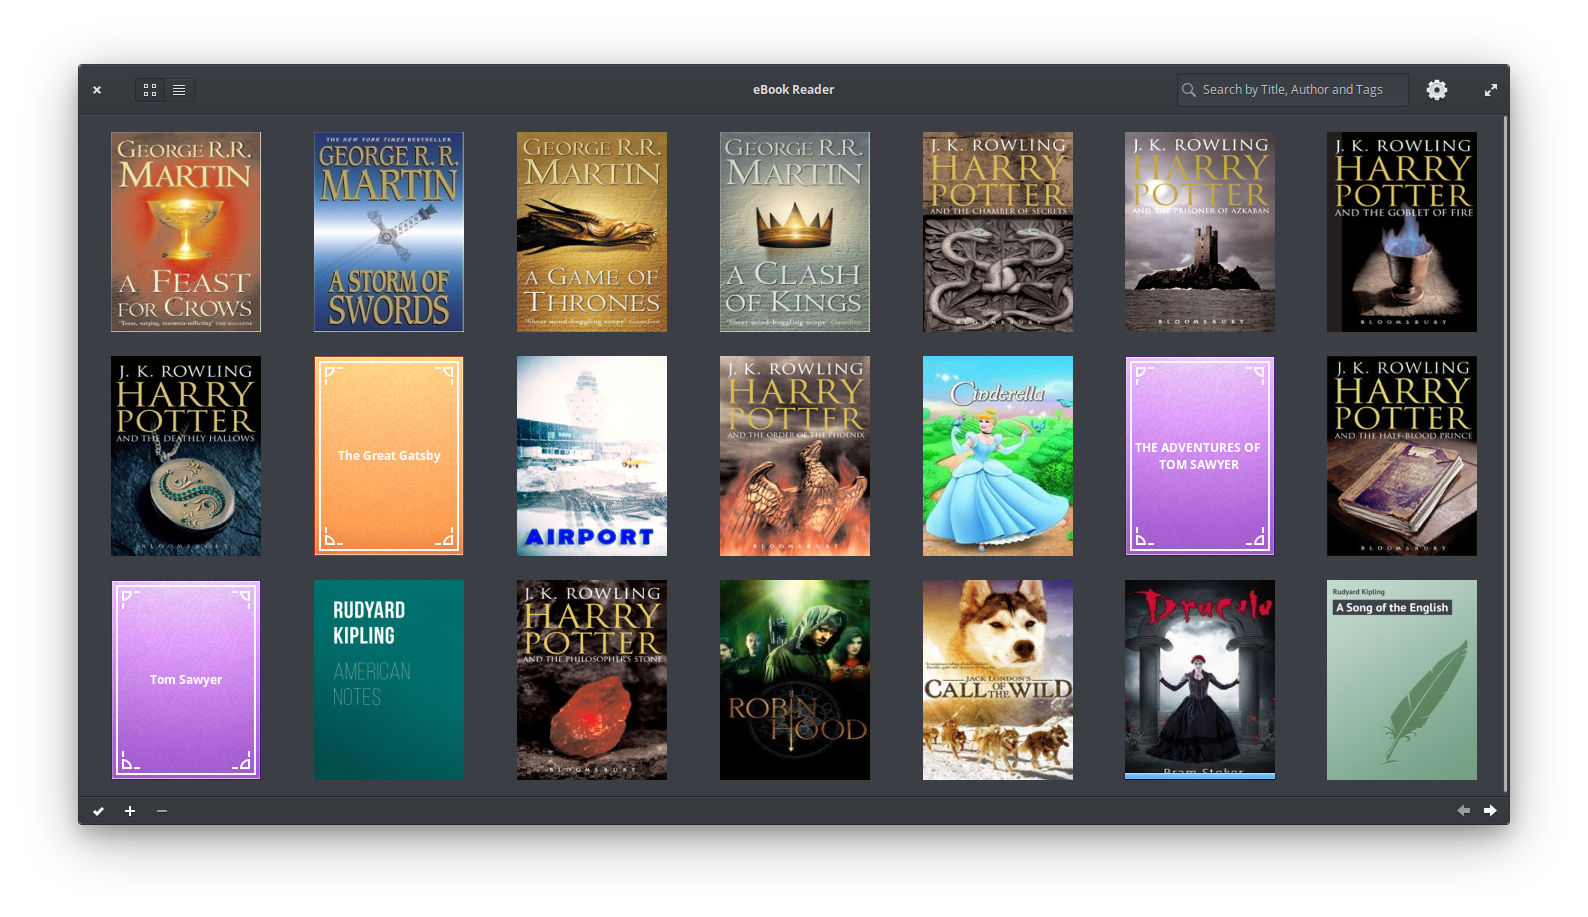 A game of thrones epub free reader